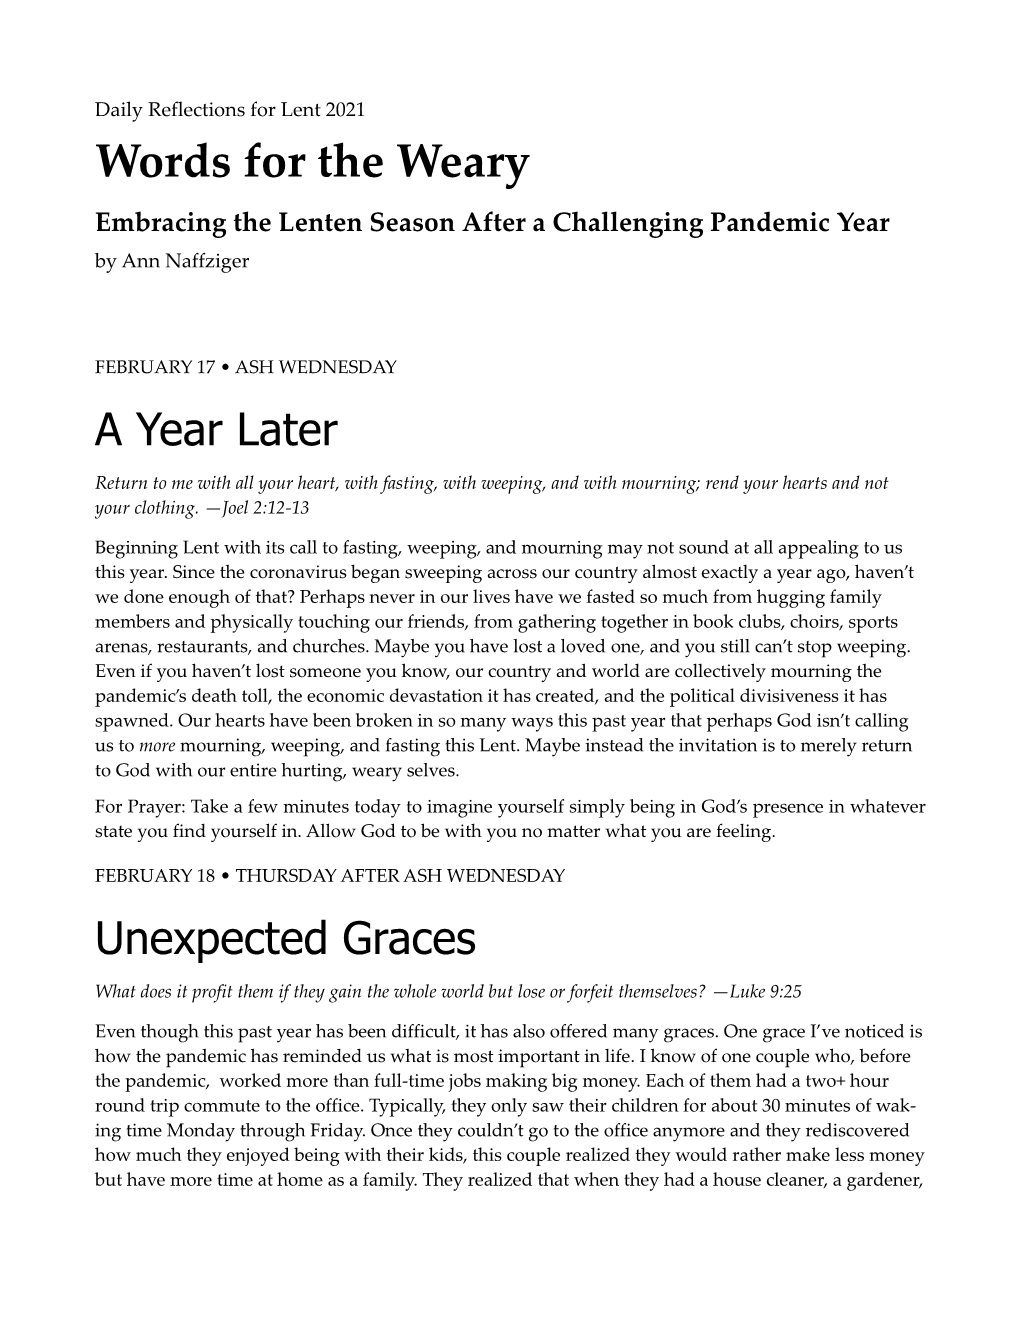 Words for the Weary Embracing the Lenten Season After a Challenging Pandemic Year by Ann Naffziger